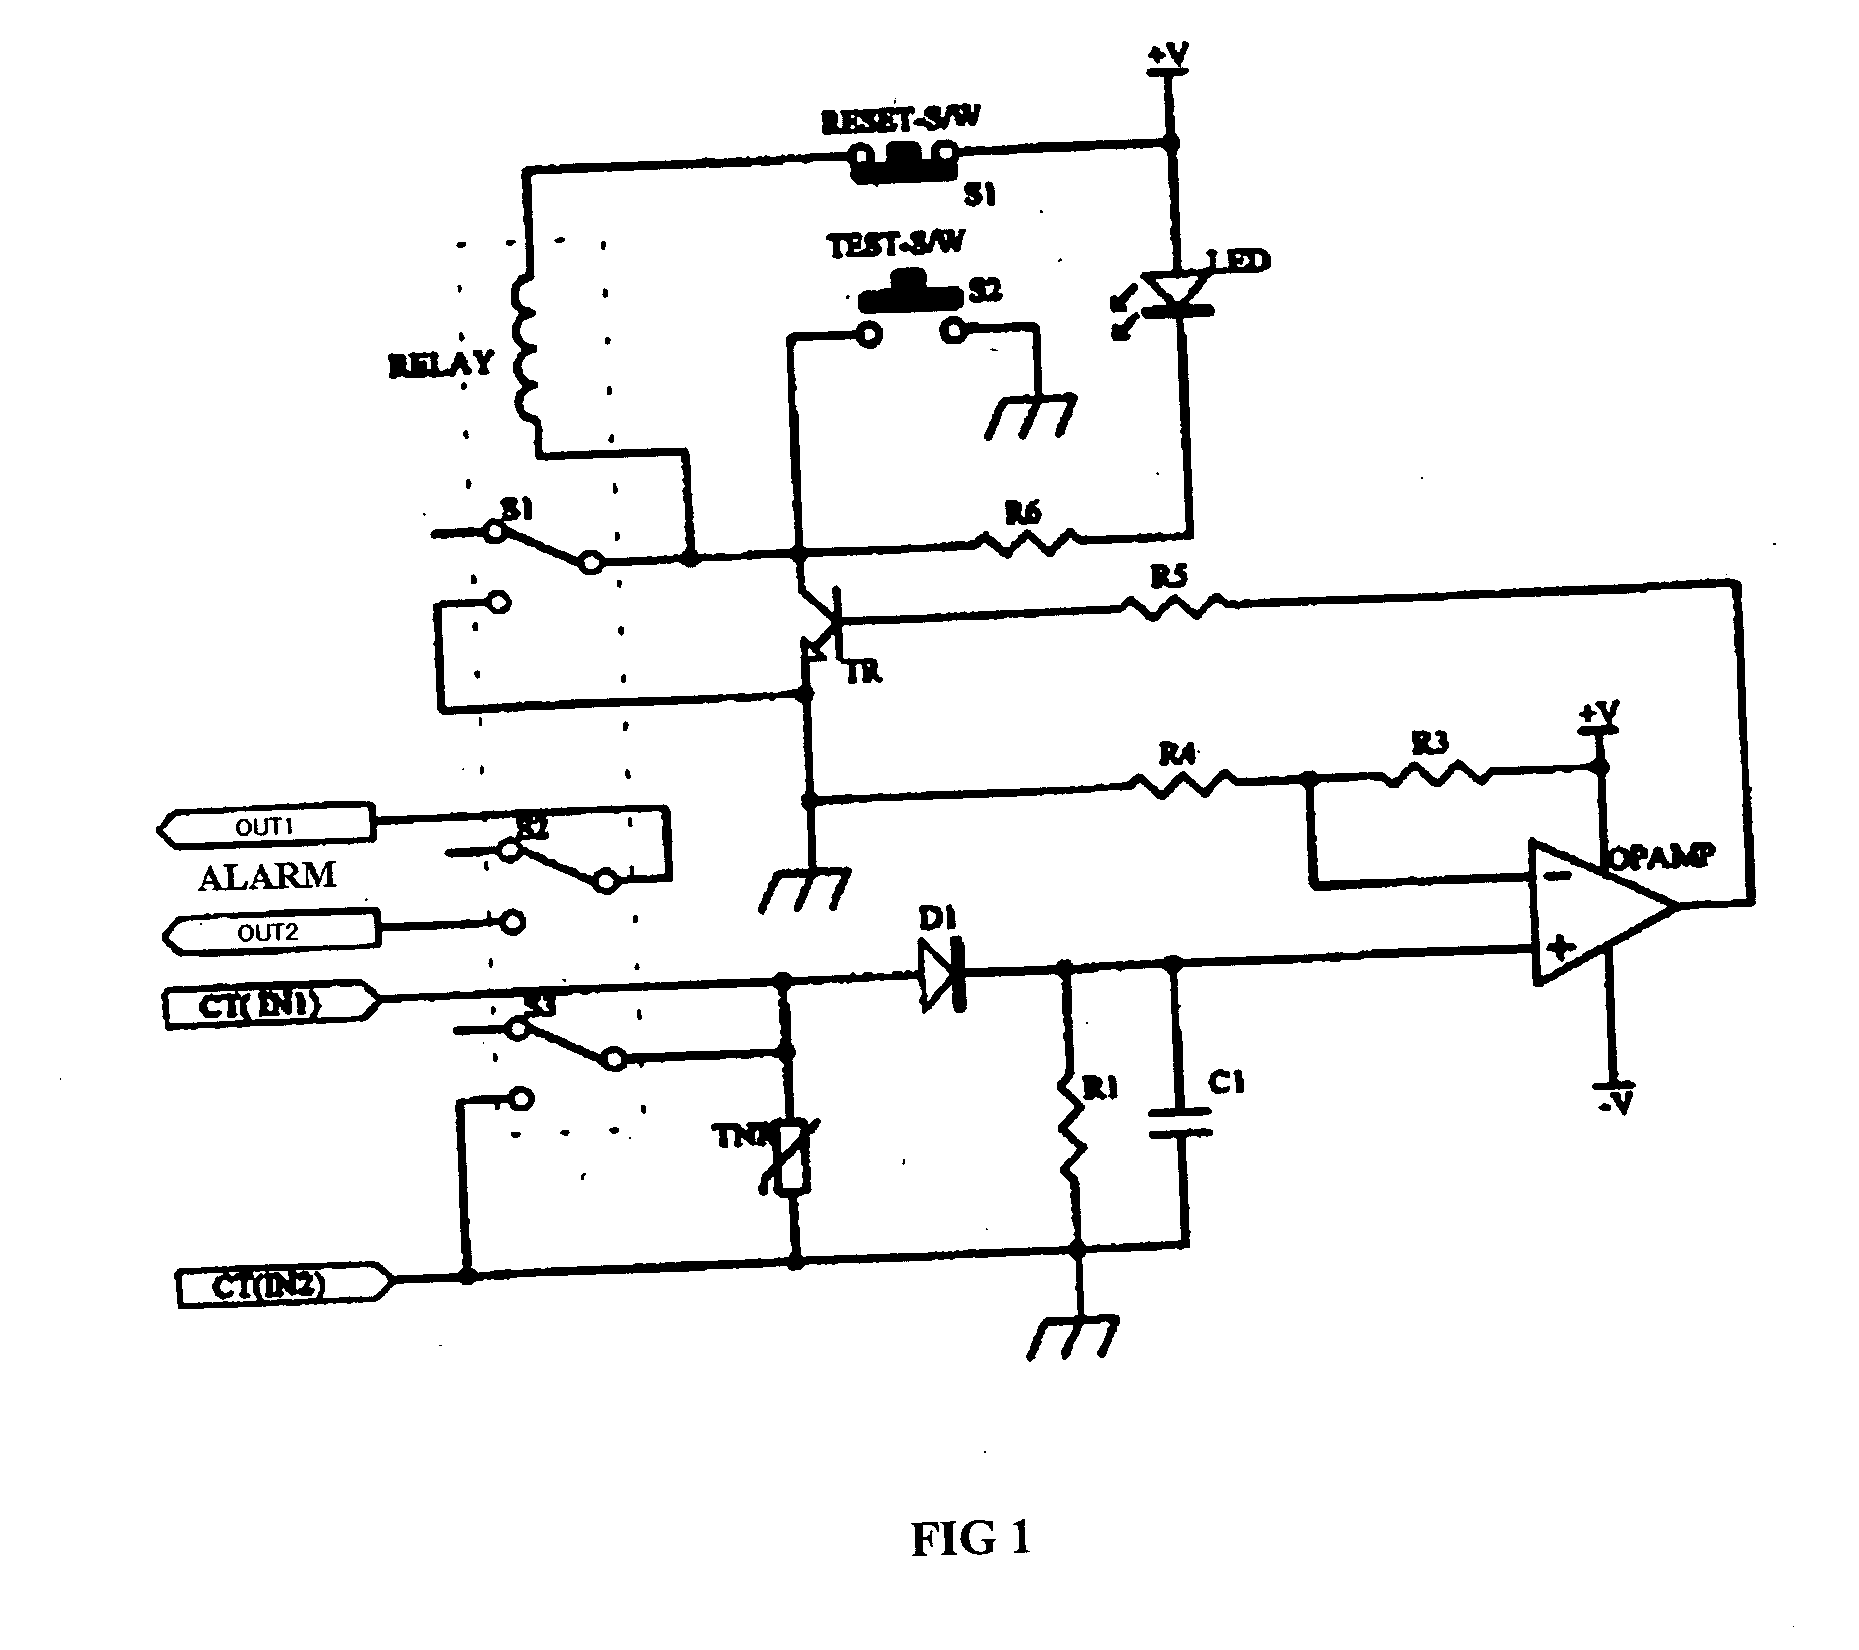 Apparatus for monitoring open state of the secondary terminals of a current transformer